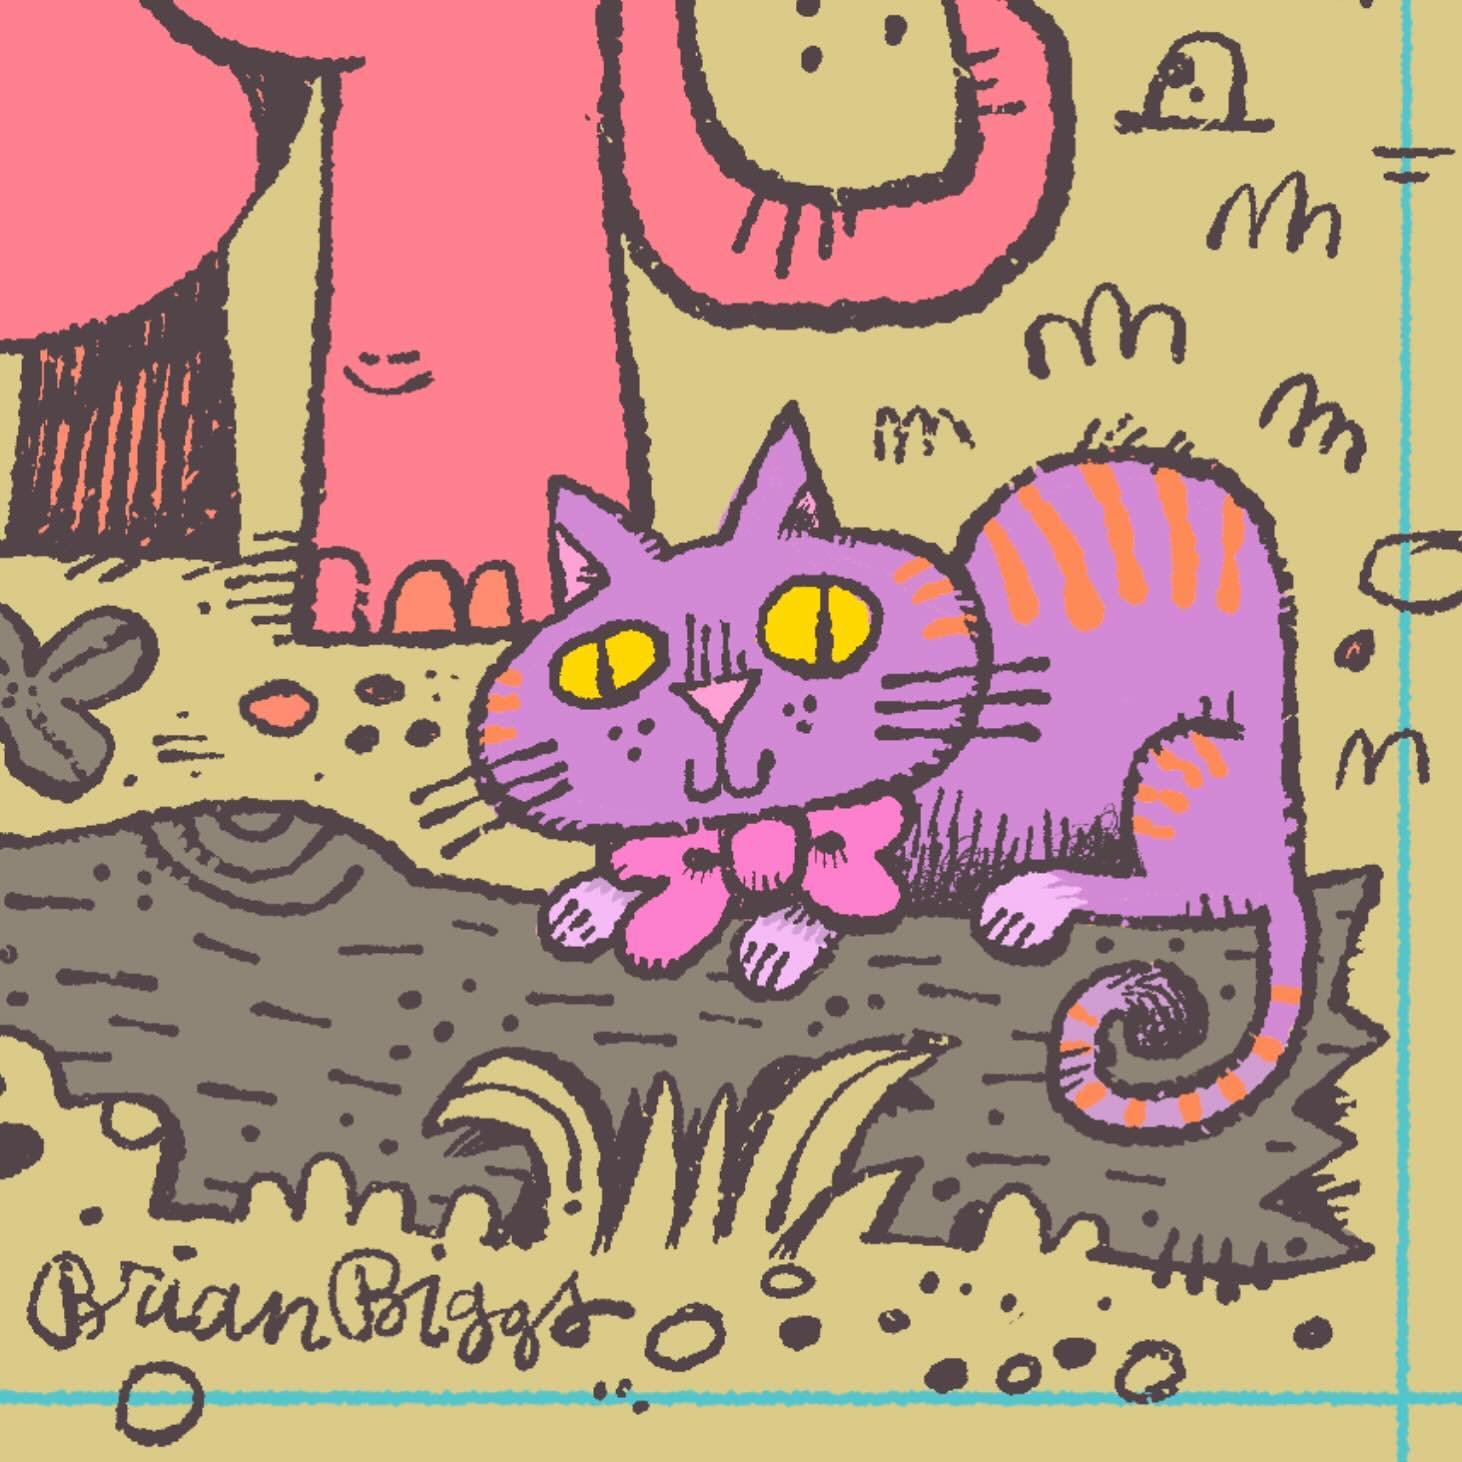 Working on a big illustration today for @nationalwildlife 
It&rsquo;s crazy with 🦖dinosaurs🦕 except for this cat. 🐈&zwj;⬛ 
Cats and dinosaurs are a delight to draw cause you can make them pretty much any color you want.
Have a great weekend. 

#di